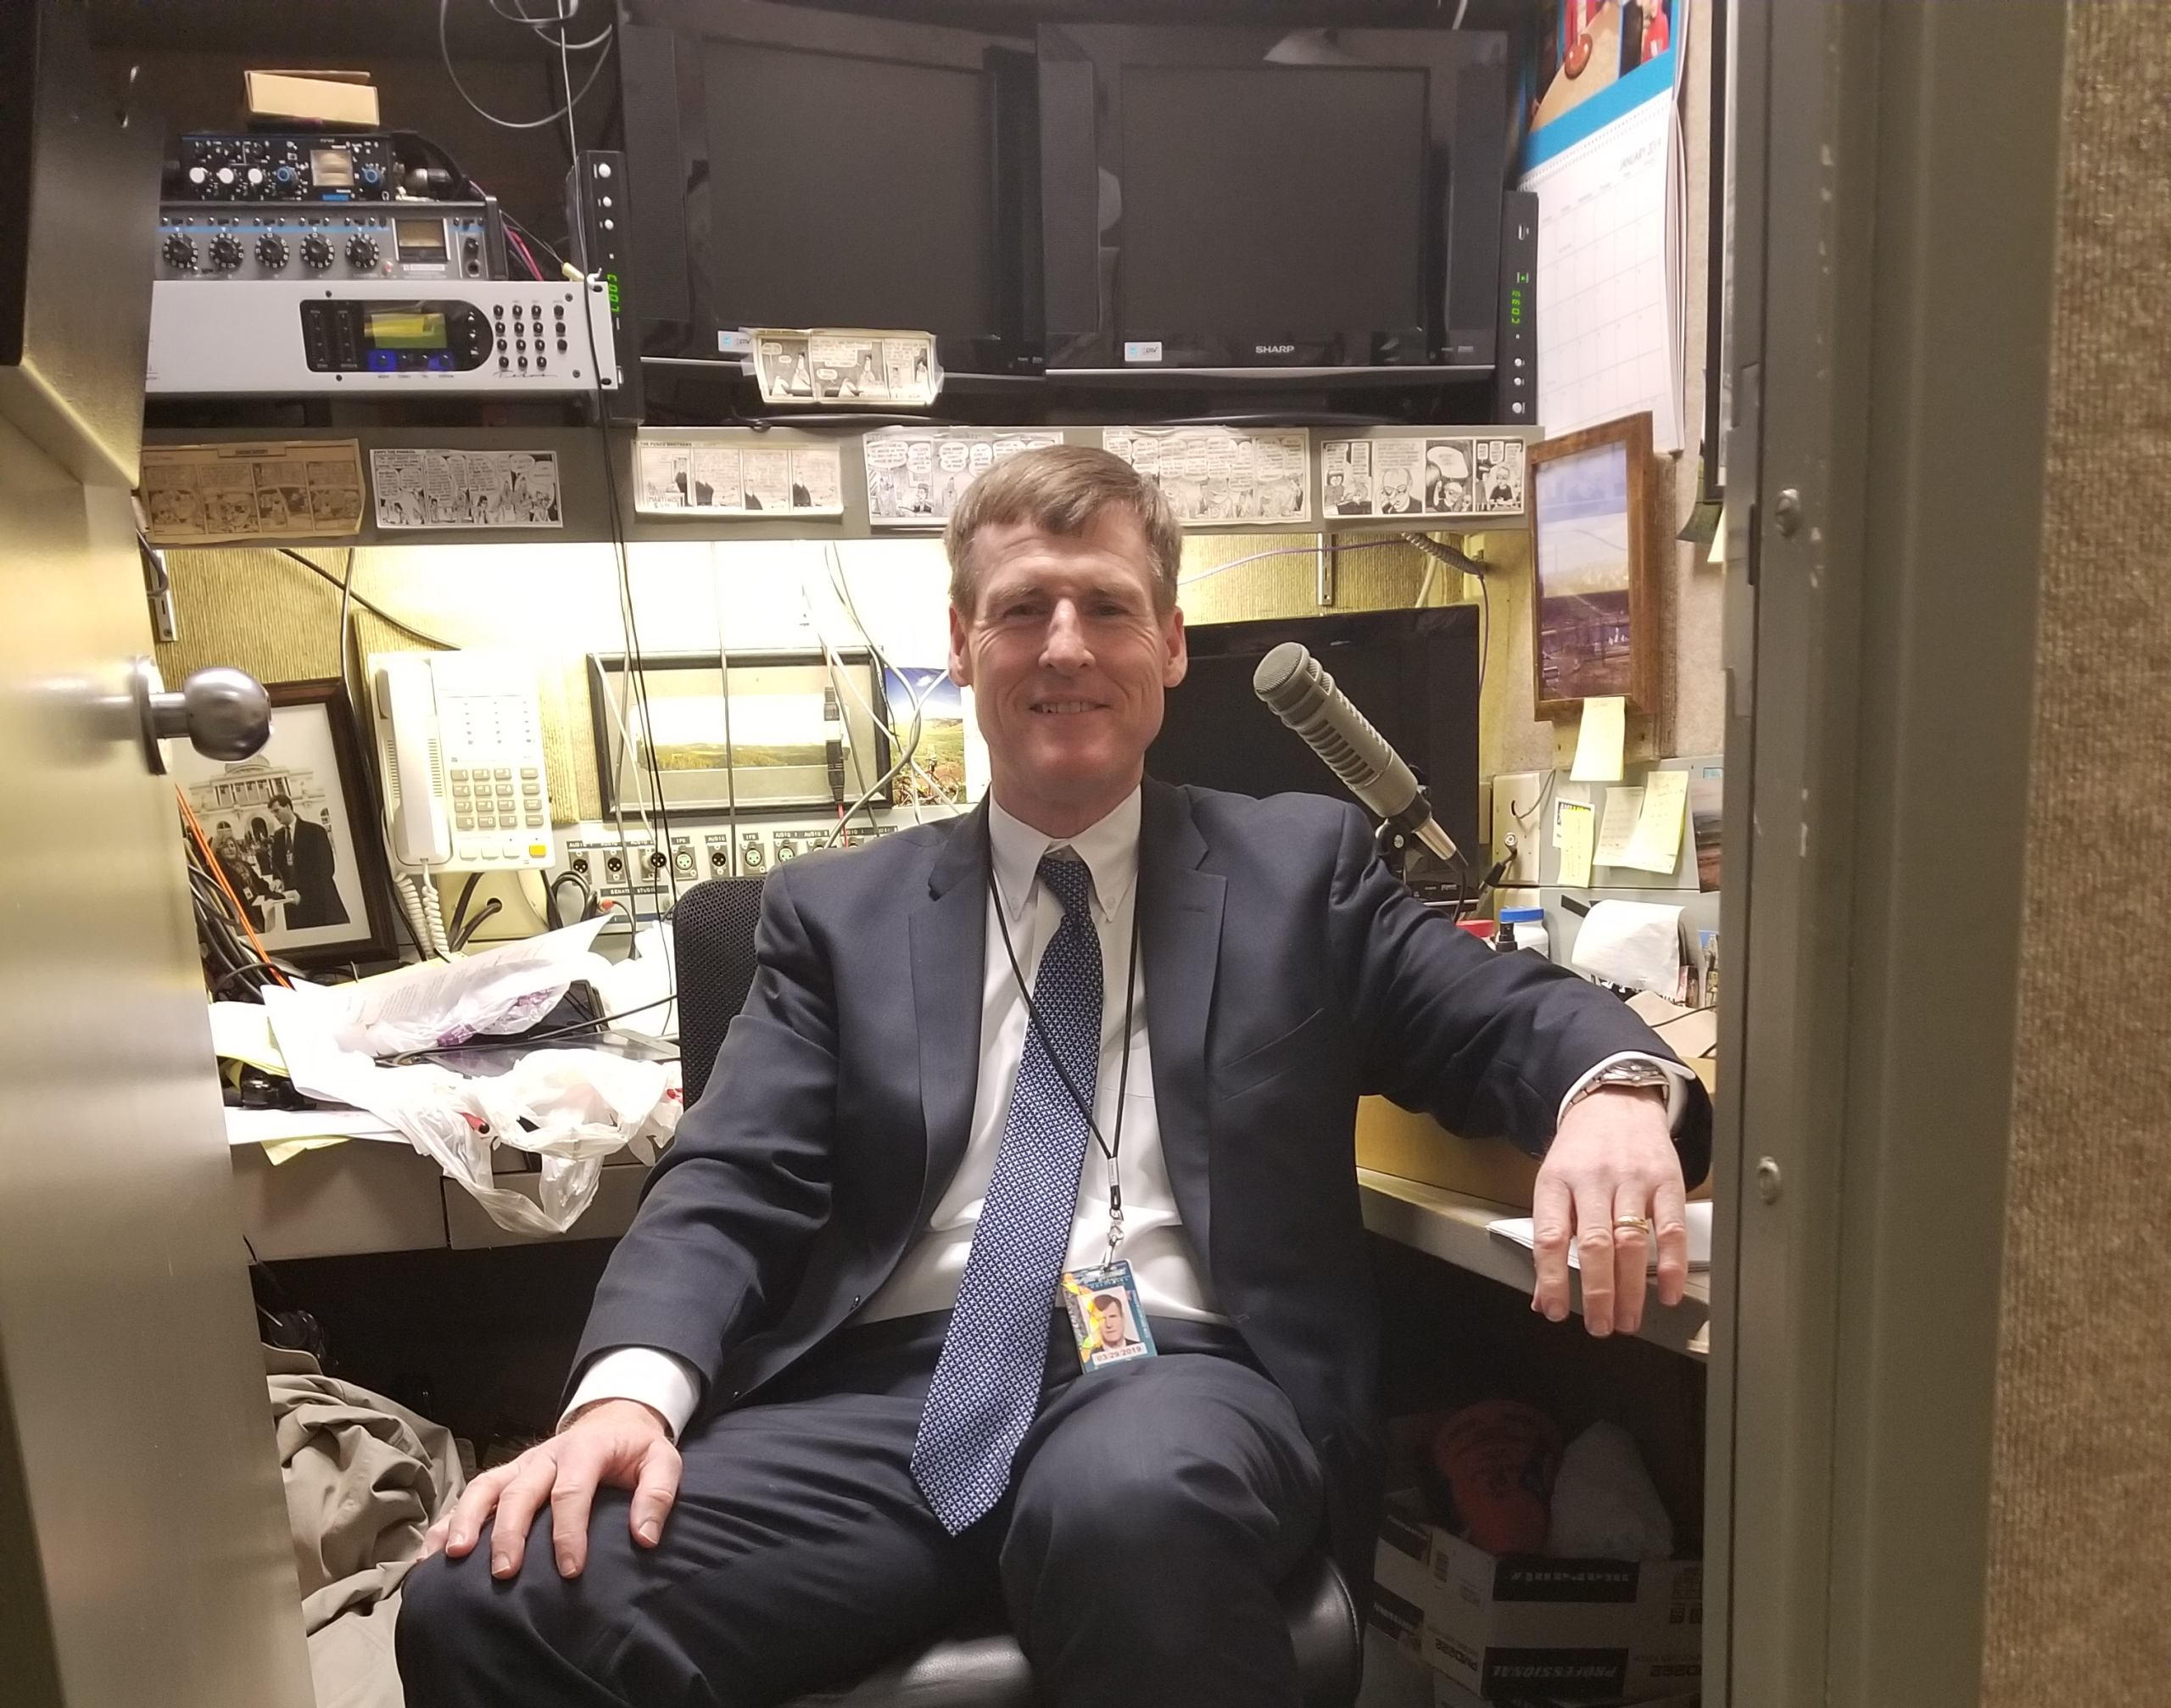 Jamie Dupree sits in his office surrounded by computers, papers, and microphones.